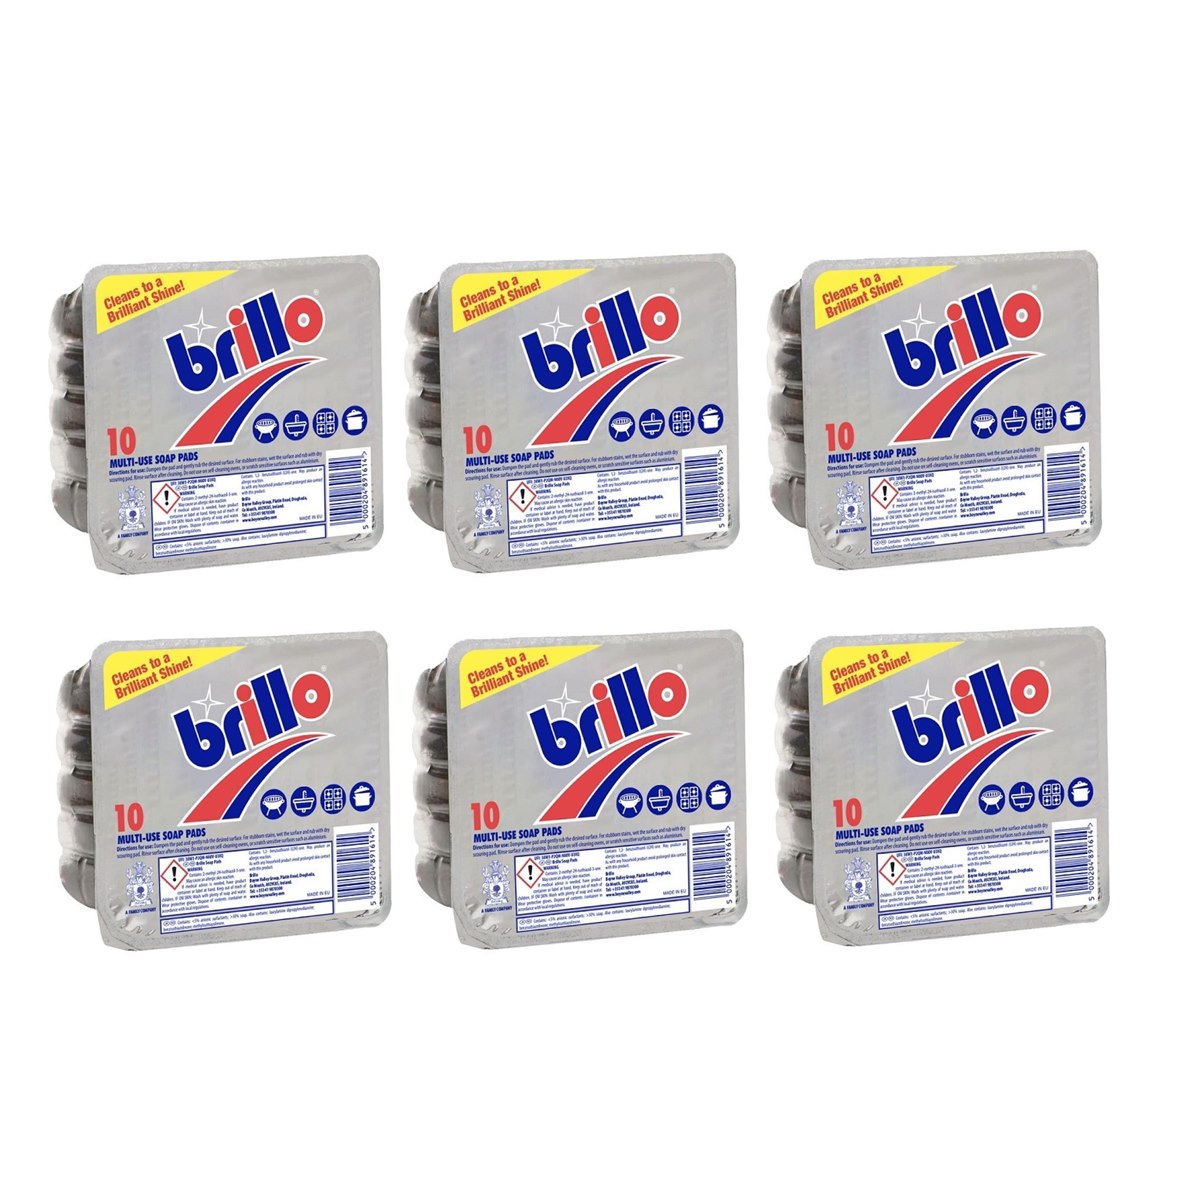 Case of 6 x Brillo Soap Pads Pack of 10